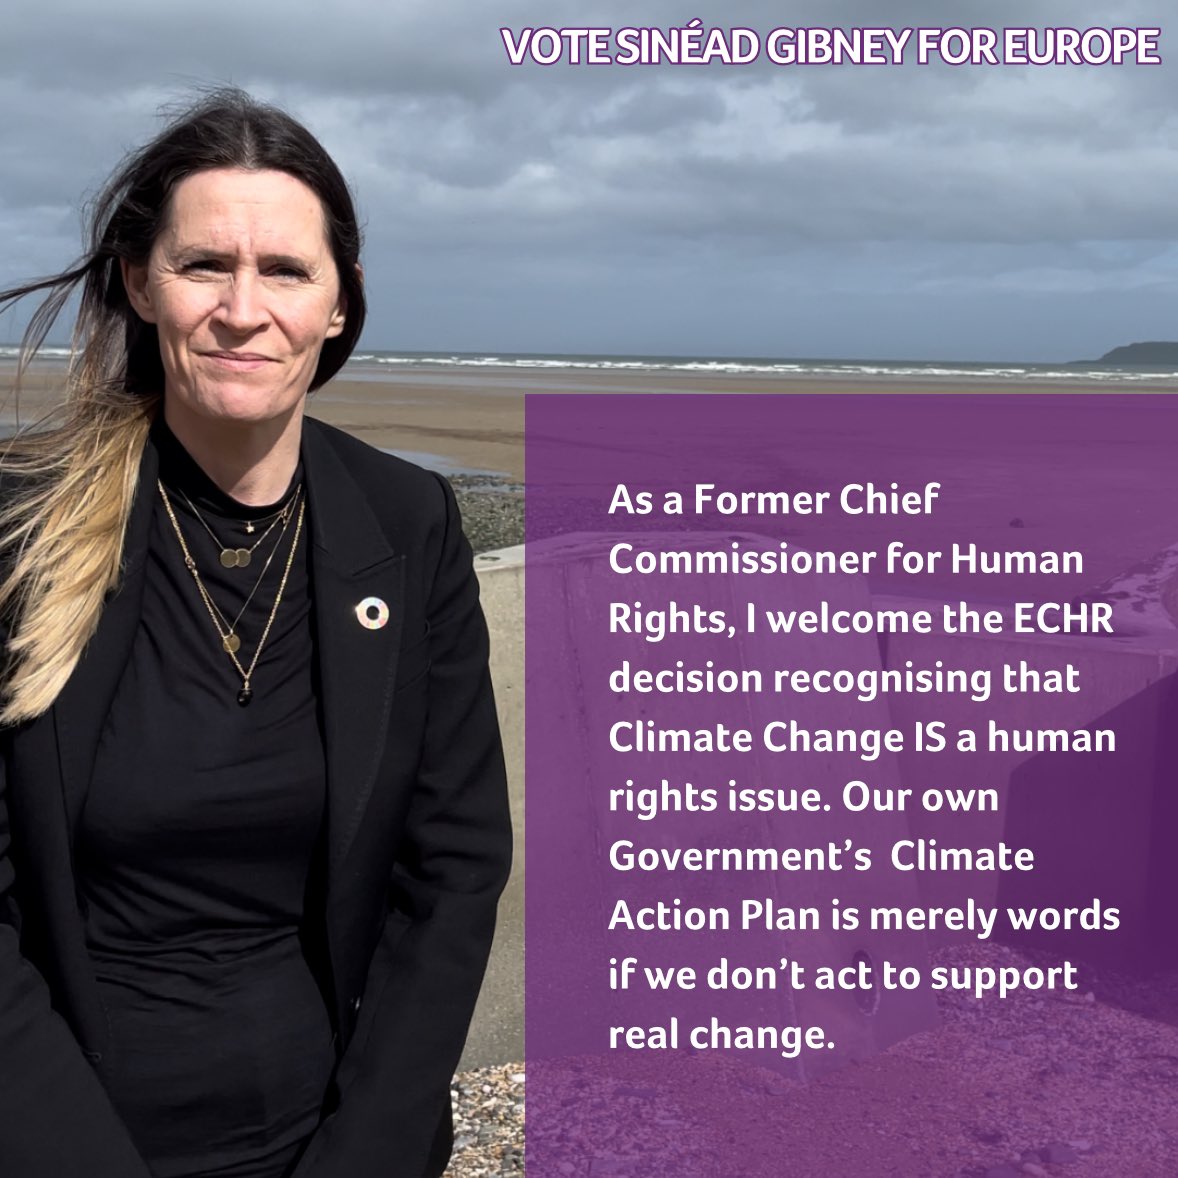 As a Former Chief Commissioner for Human Rights, I welcome the ECHR decision recognising that Climate Change IS a human rights issue. Read more about the @SocDems stance here x.com/socdems/status…